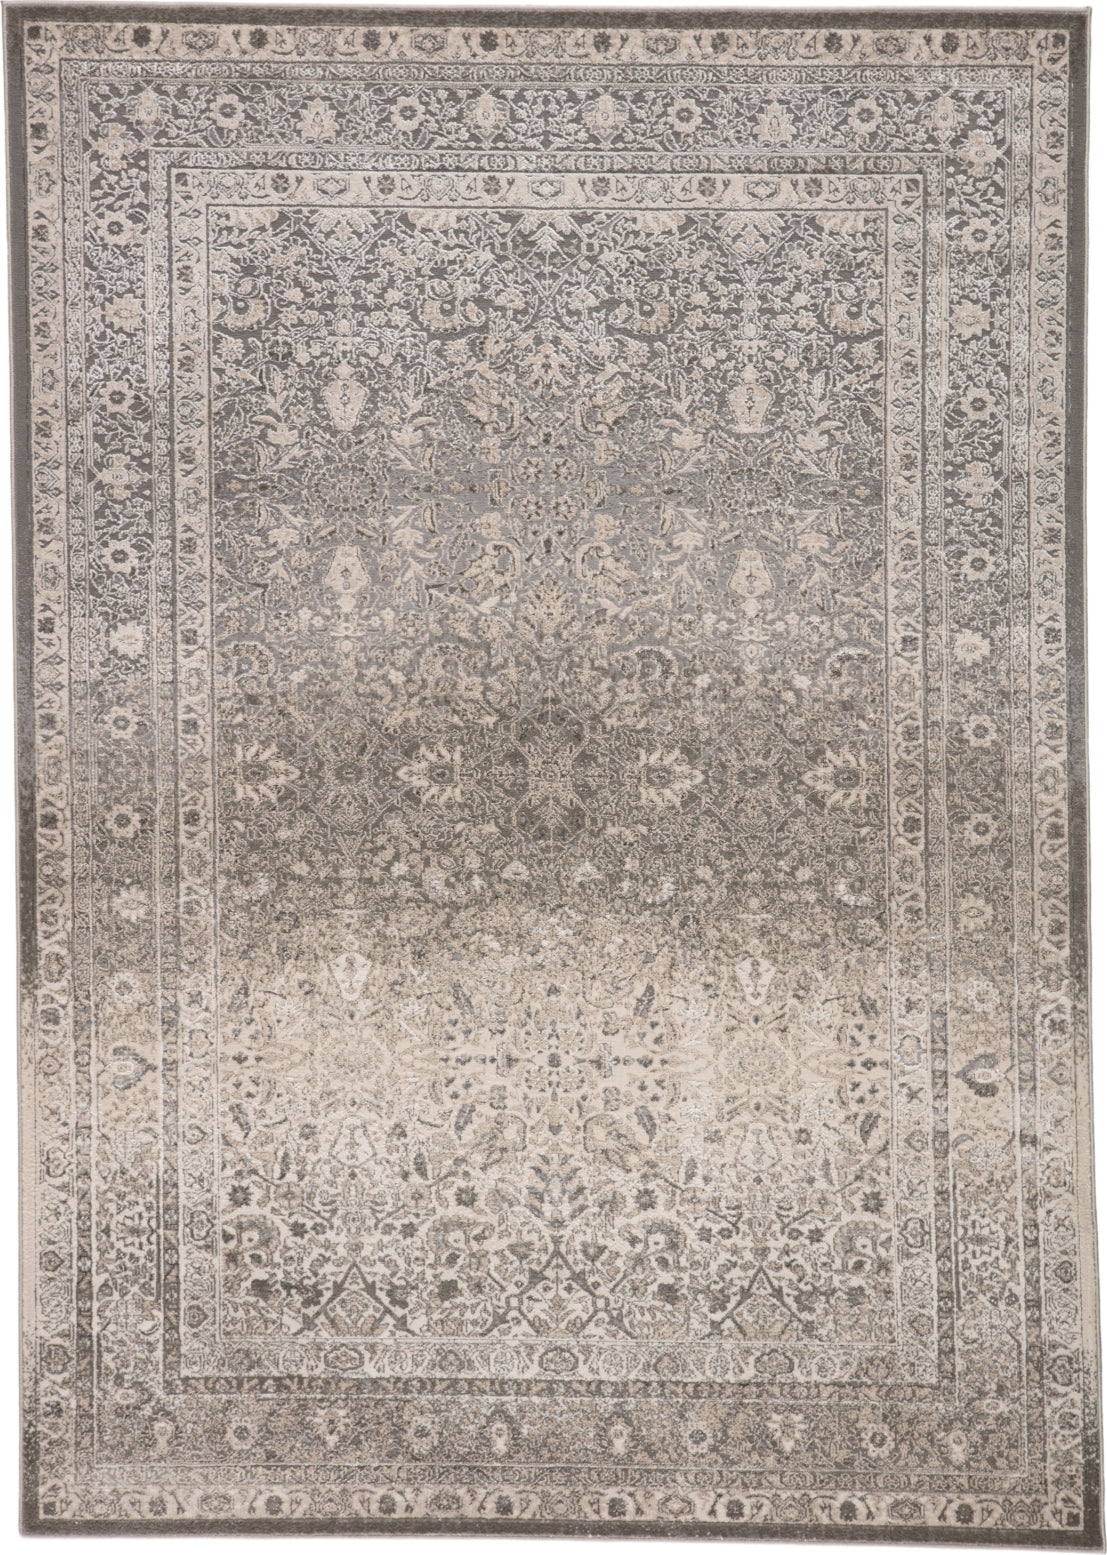 Jaipur Living Sinclaire Safiyya SNL06 Gray/White Area Rug by Vibe  Main Image